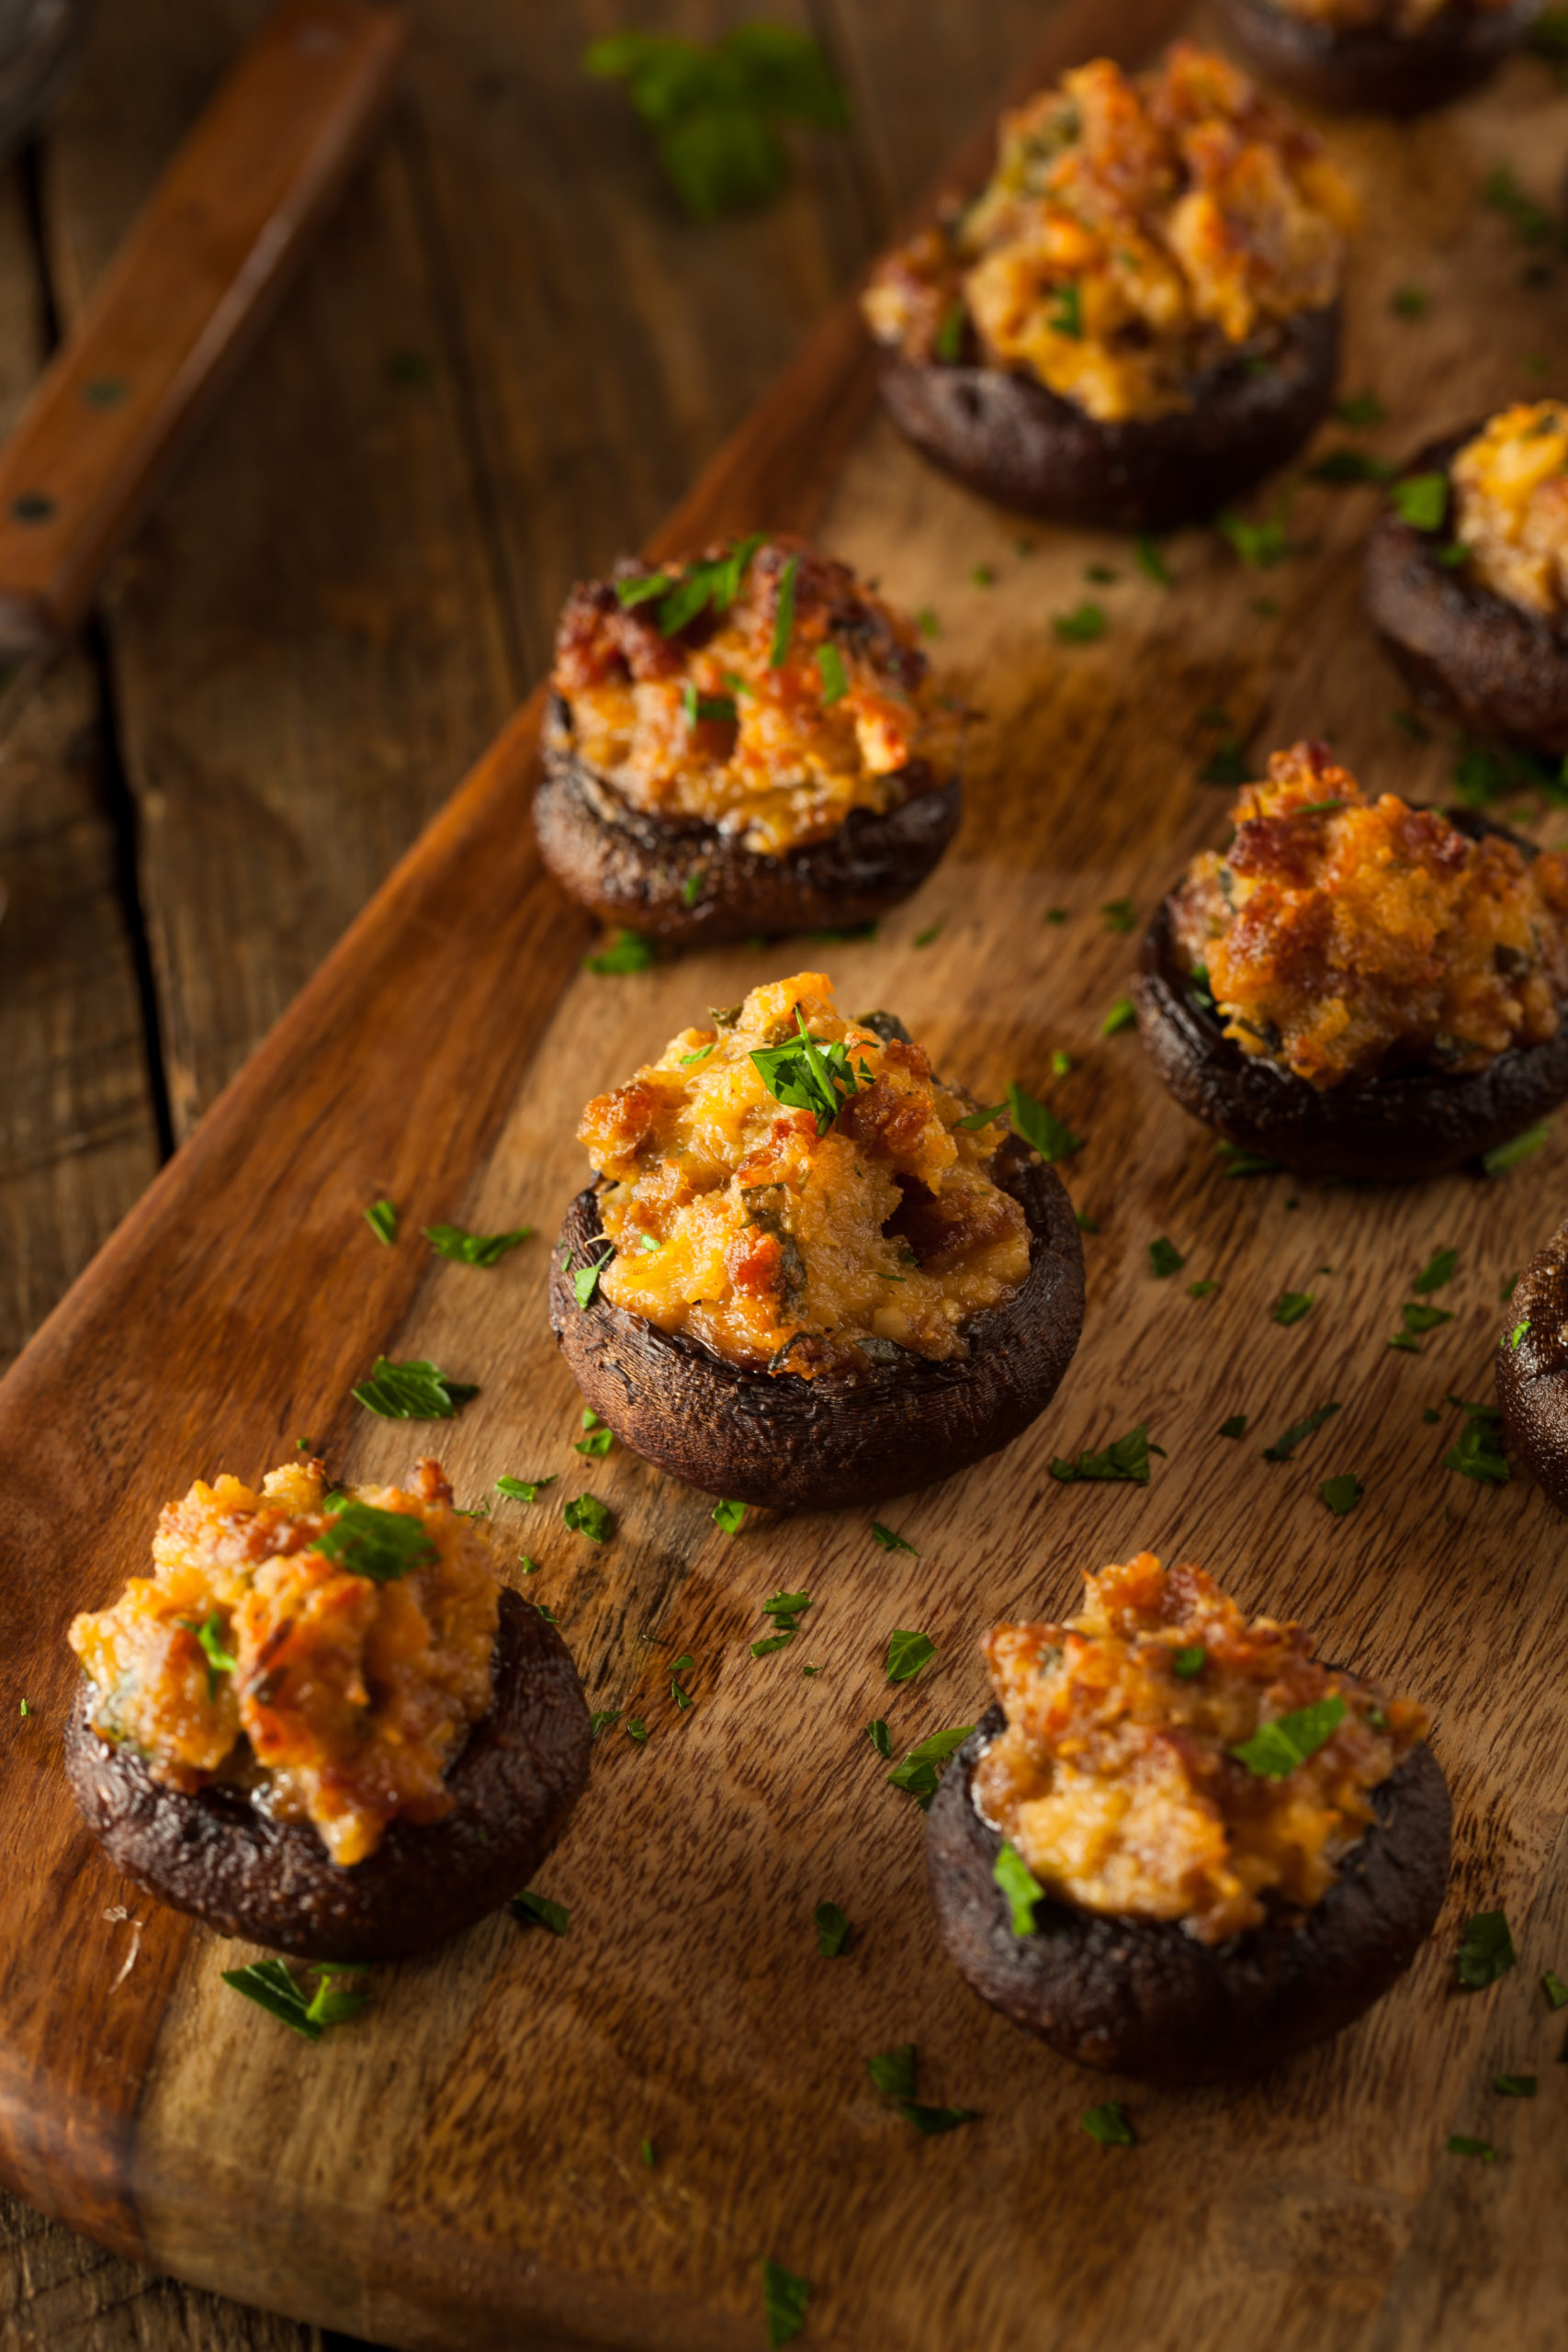 Homemade Sausage Stuffed Mushrooms with Cheese and Parsley